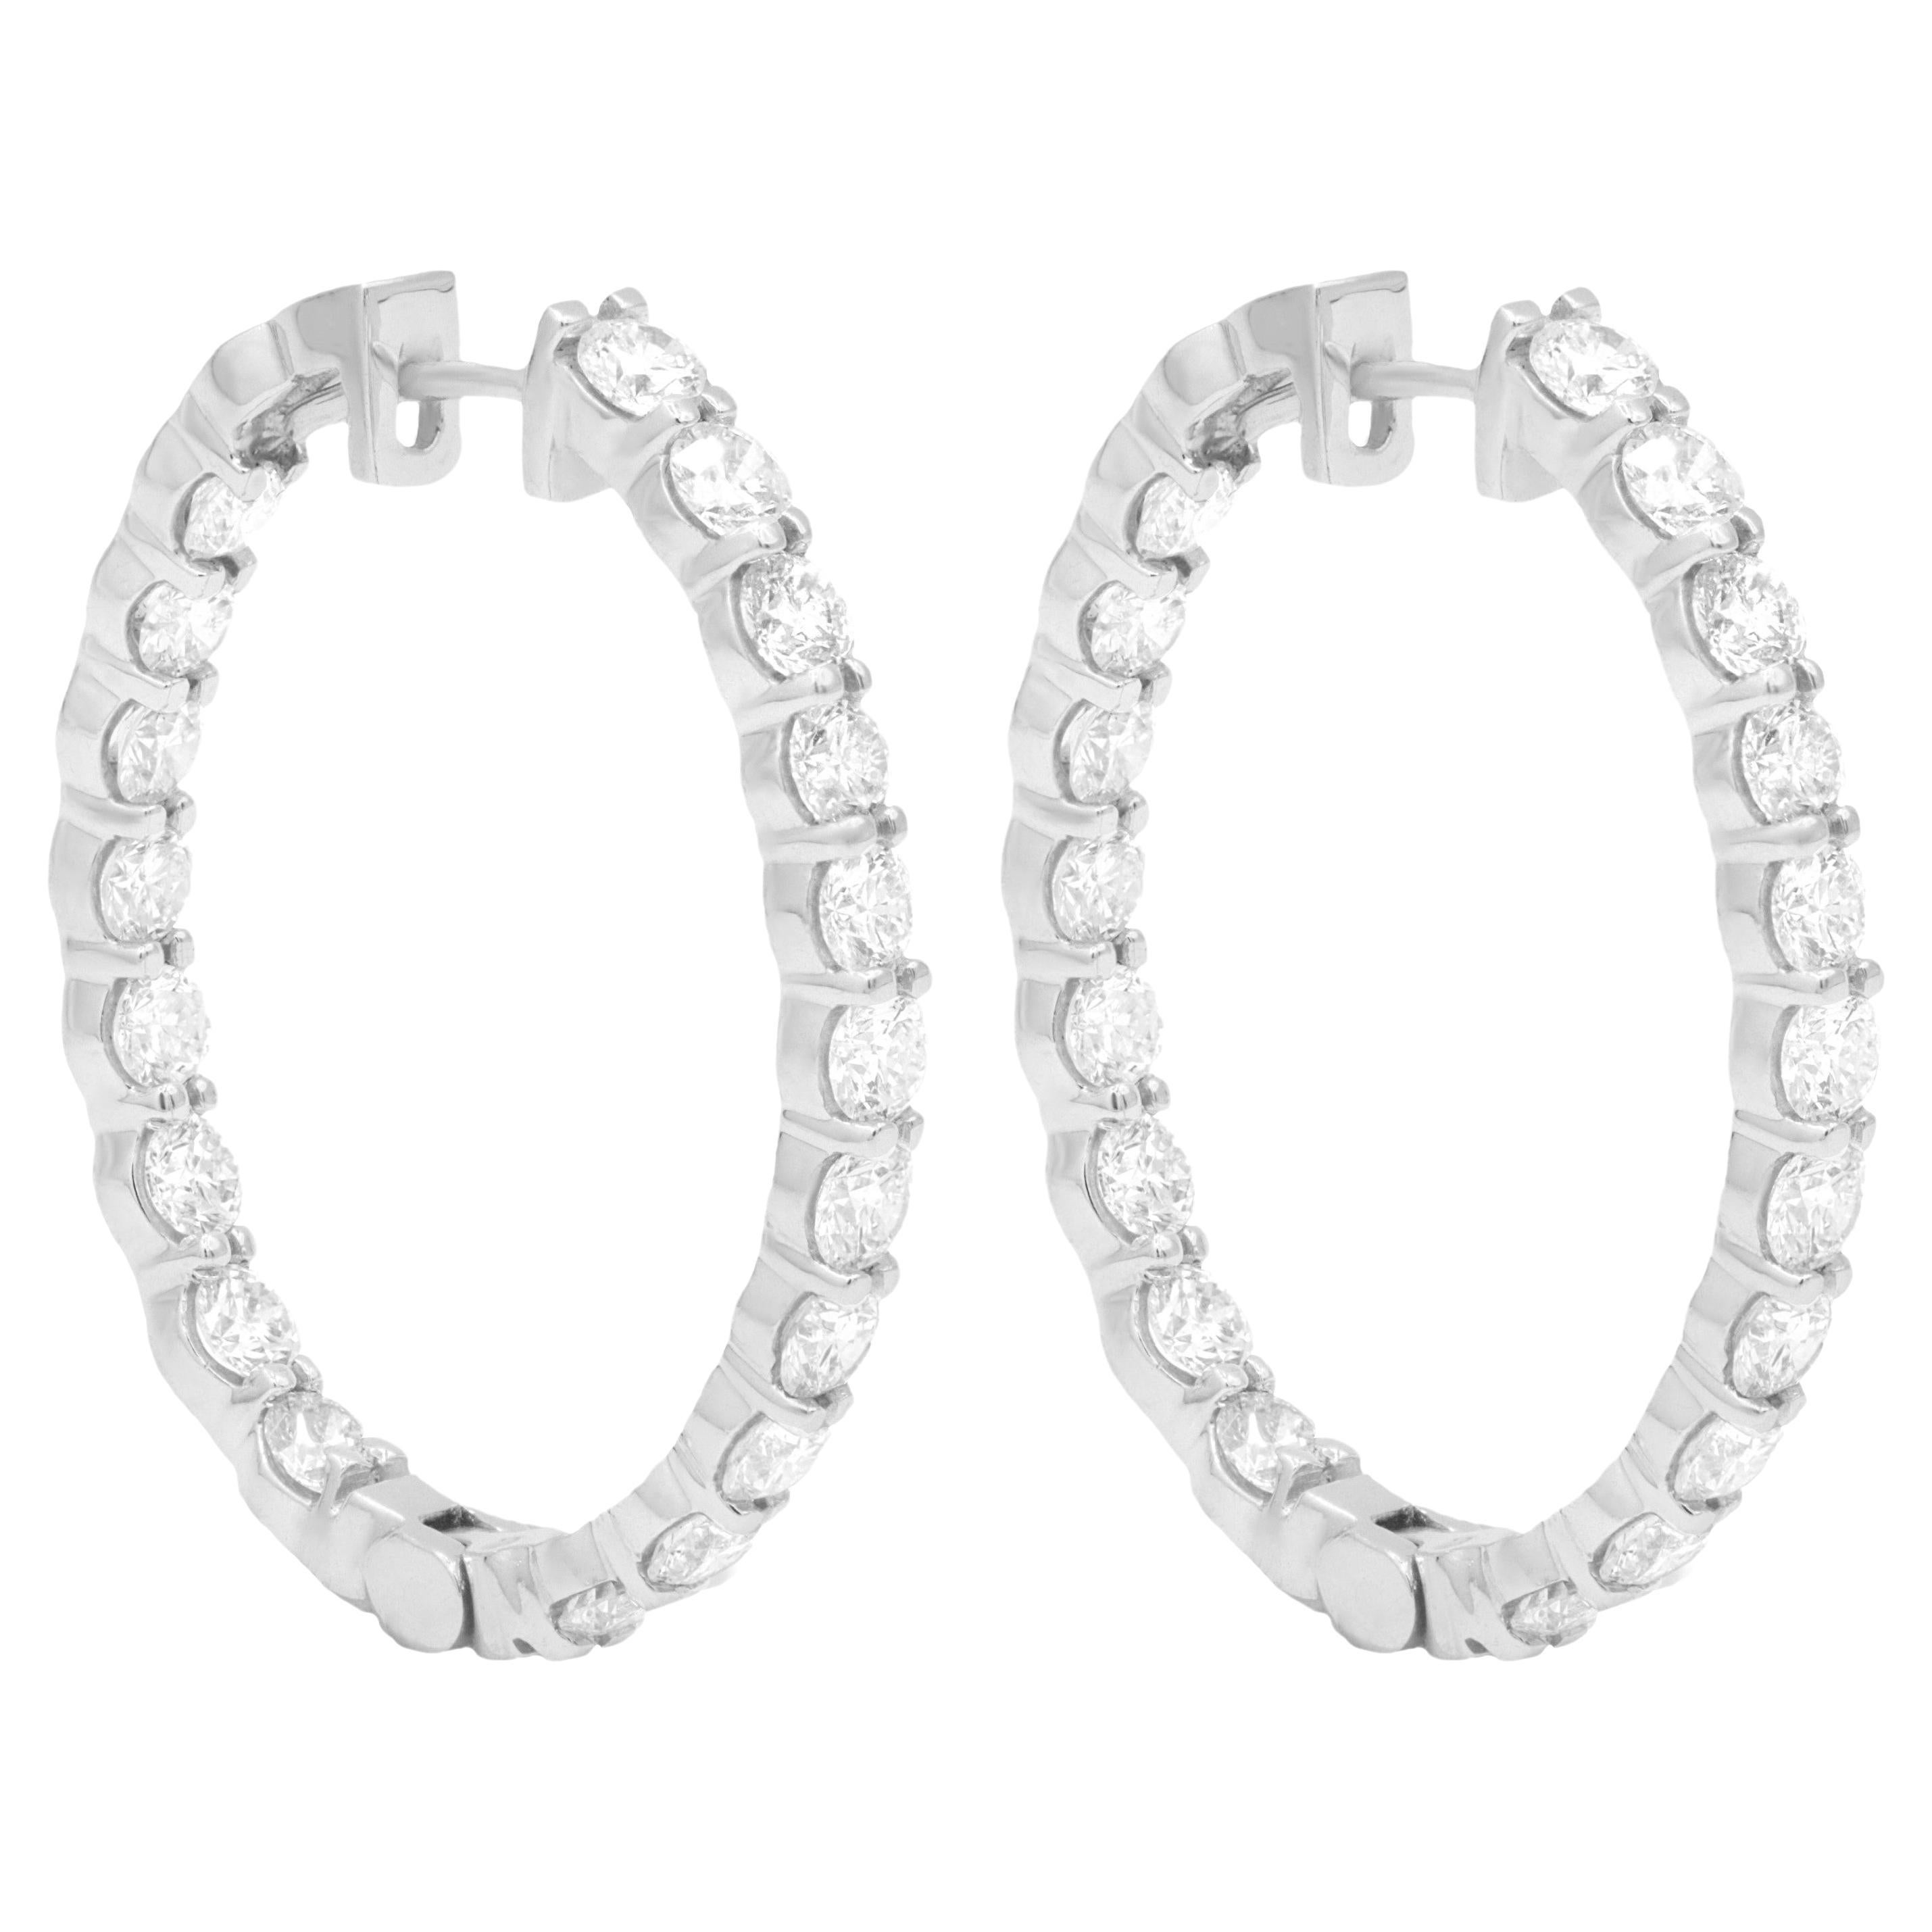 Diana M.14 kt white gold, 1.50" inside-out hoop earrings adorned with 8.12 cts  For Sale